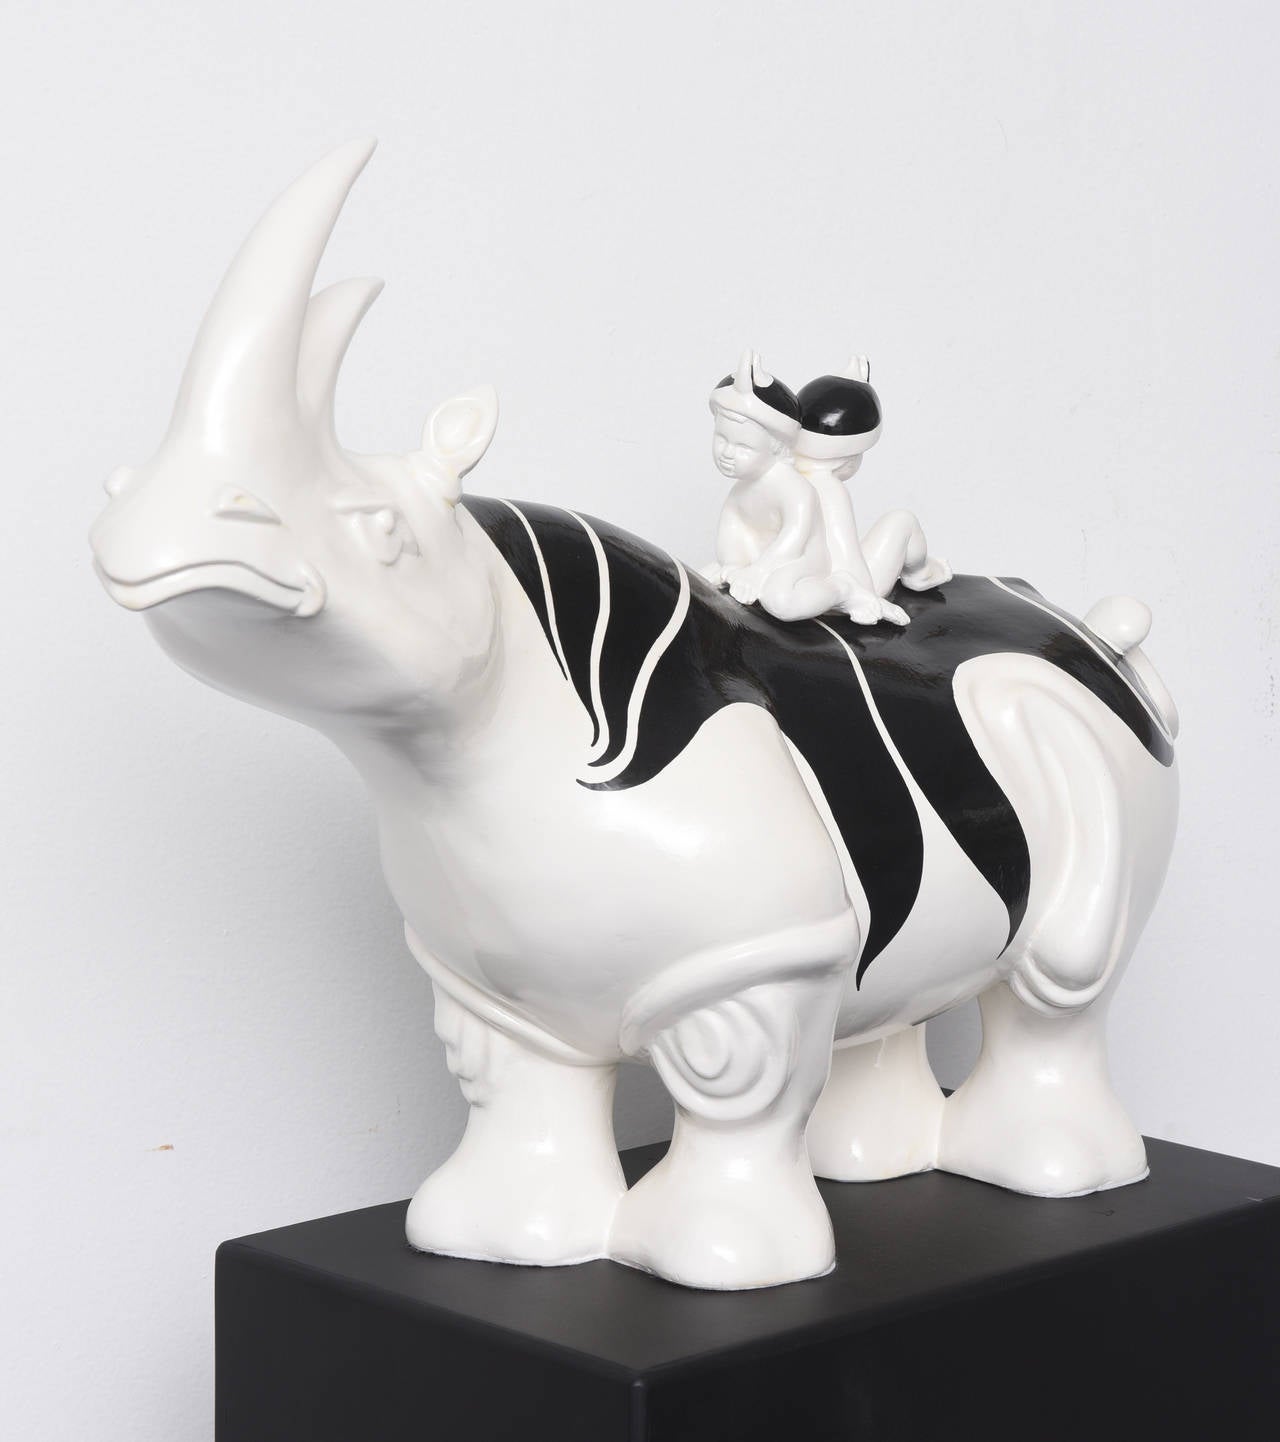 With humour and humility, the artist creates meaningful pieces fed by sense and aesthetic. All his animal sculptures are singular and can be seen in many different ways depending the level of interpretation.